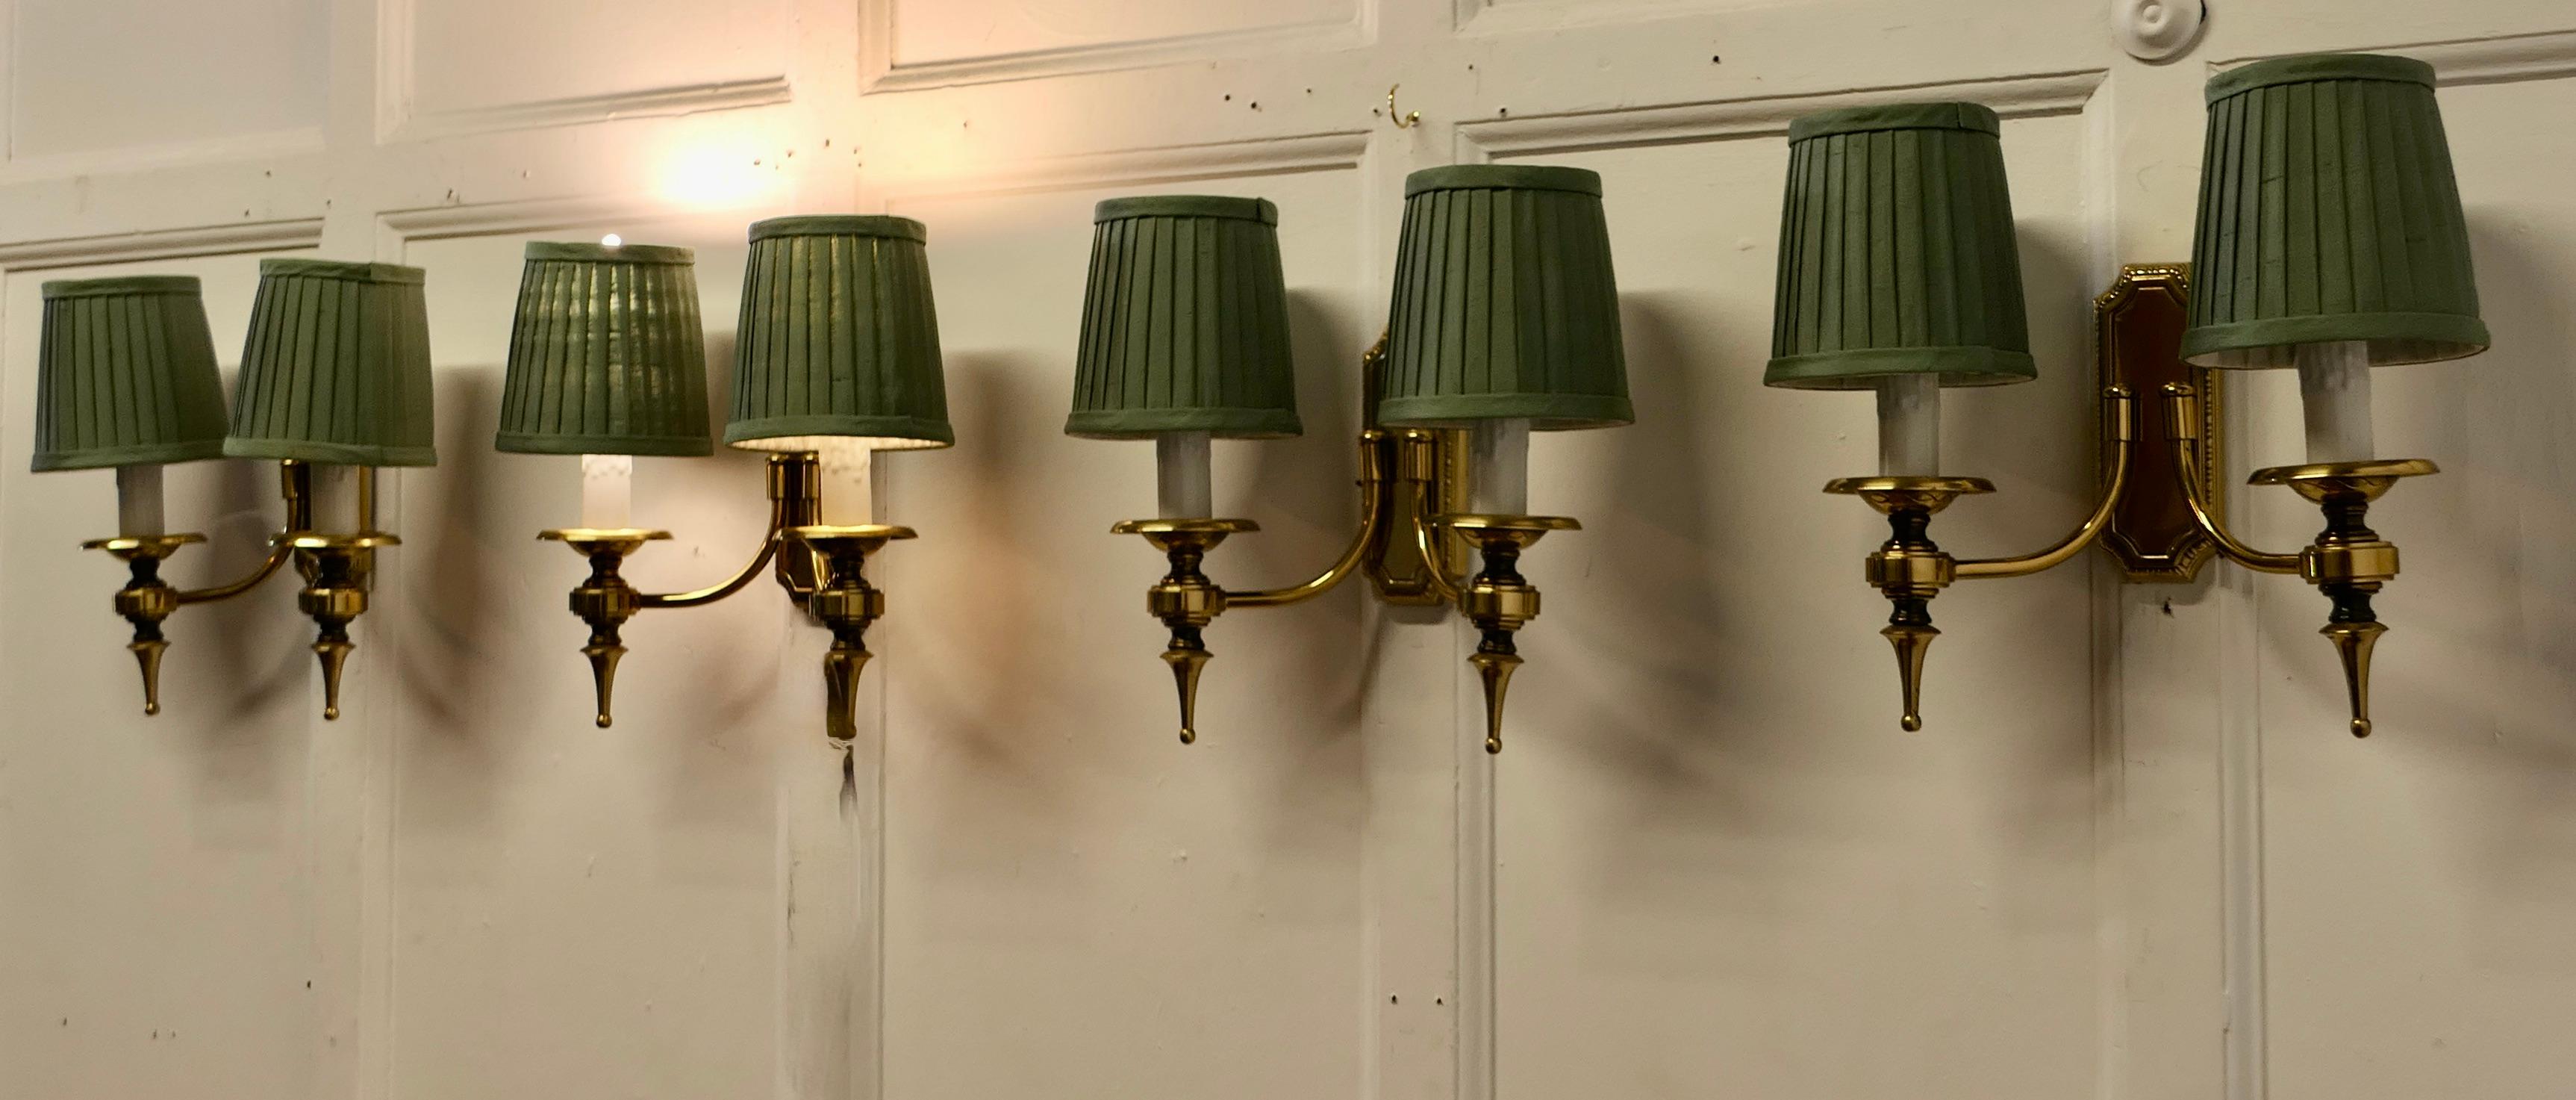 A Set of 4 Twin Wall Lights  A very handsome set of 4 double wall lights  2